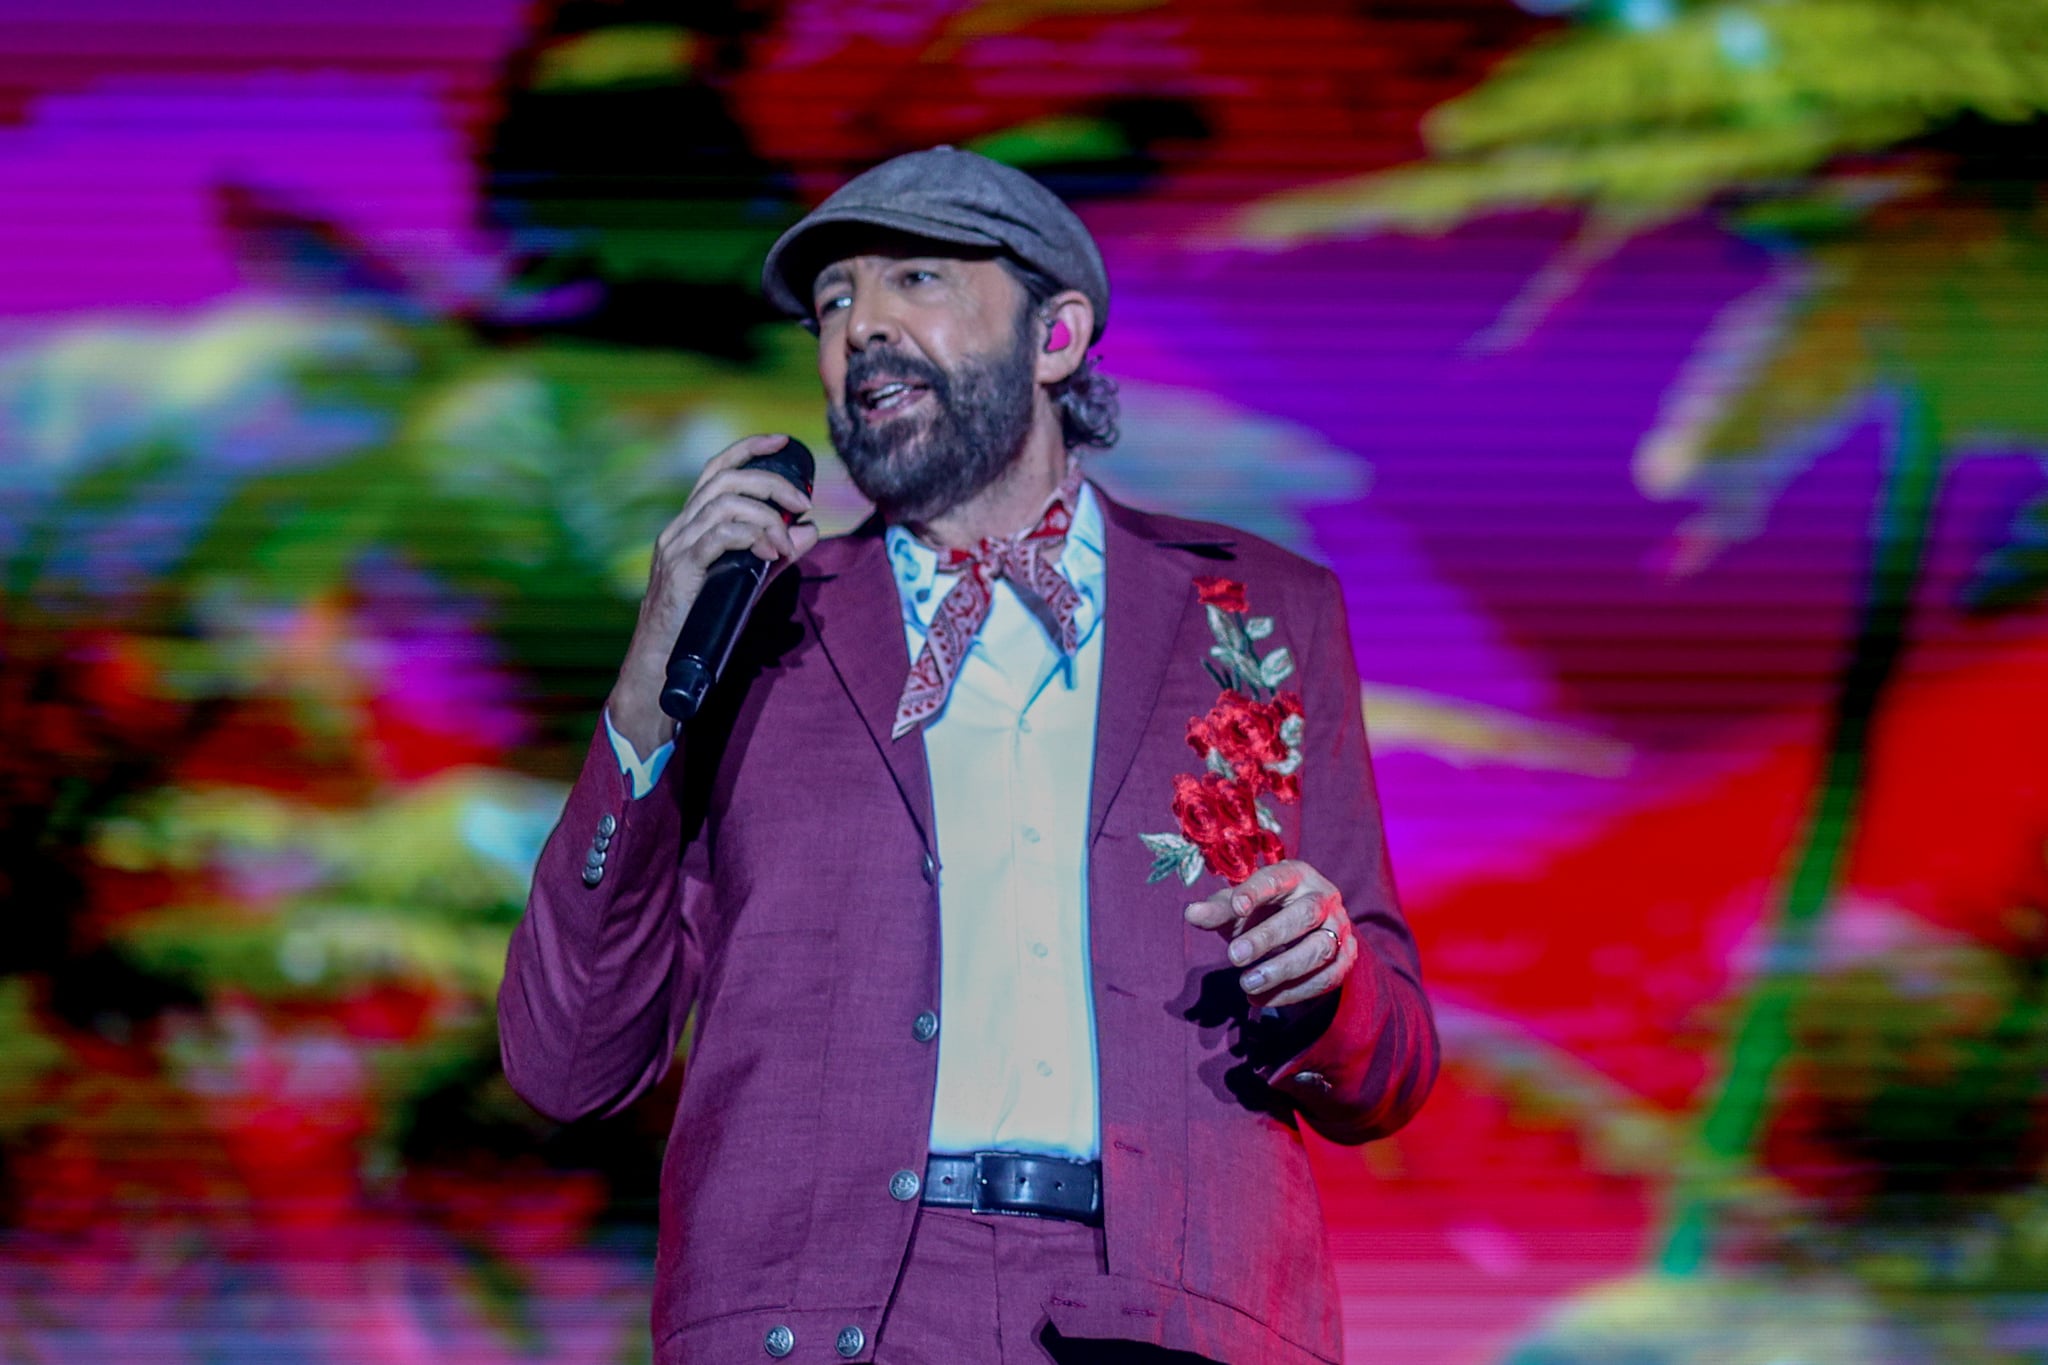 SPAIN - JULY 02: Dominican singer-songwriter Juan Luis Guerra will perform at the fifth edition of the Rio Babel Festival, at the Caja Magica in Madrid, on 02 July, 2023 in Madrid, Spain. The singer arrives at Rio Babel with the show 'Juan Luis Guerra 4.0', where he presents all the anthems of his musical career, including 'La Bilirrubina'. During the event, which runs from yesterday, June 30 until tomorrow, July 2, musical genres such as indie, electronic, Latin sound and urban music are mixed. (Photo By Ricardo Rubio/Europa Press via Getty Images)